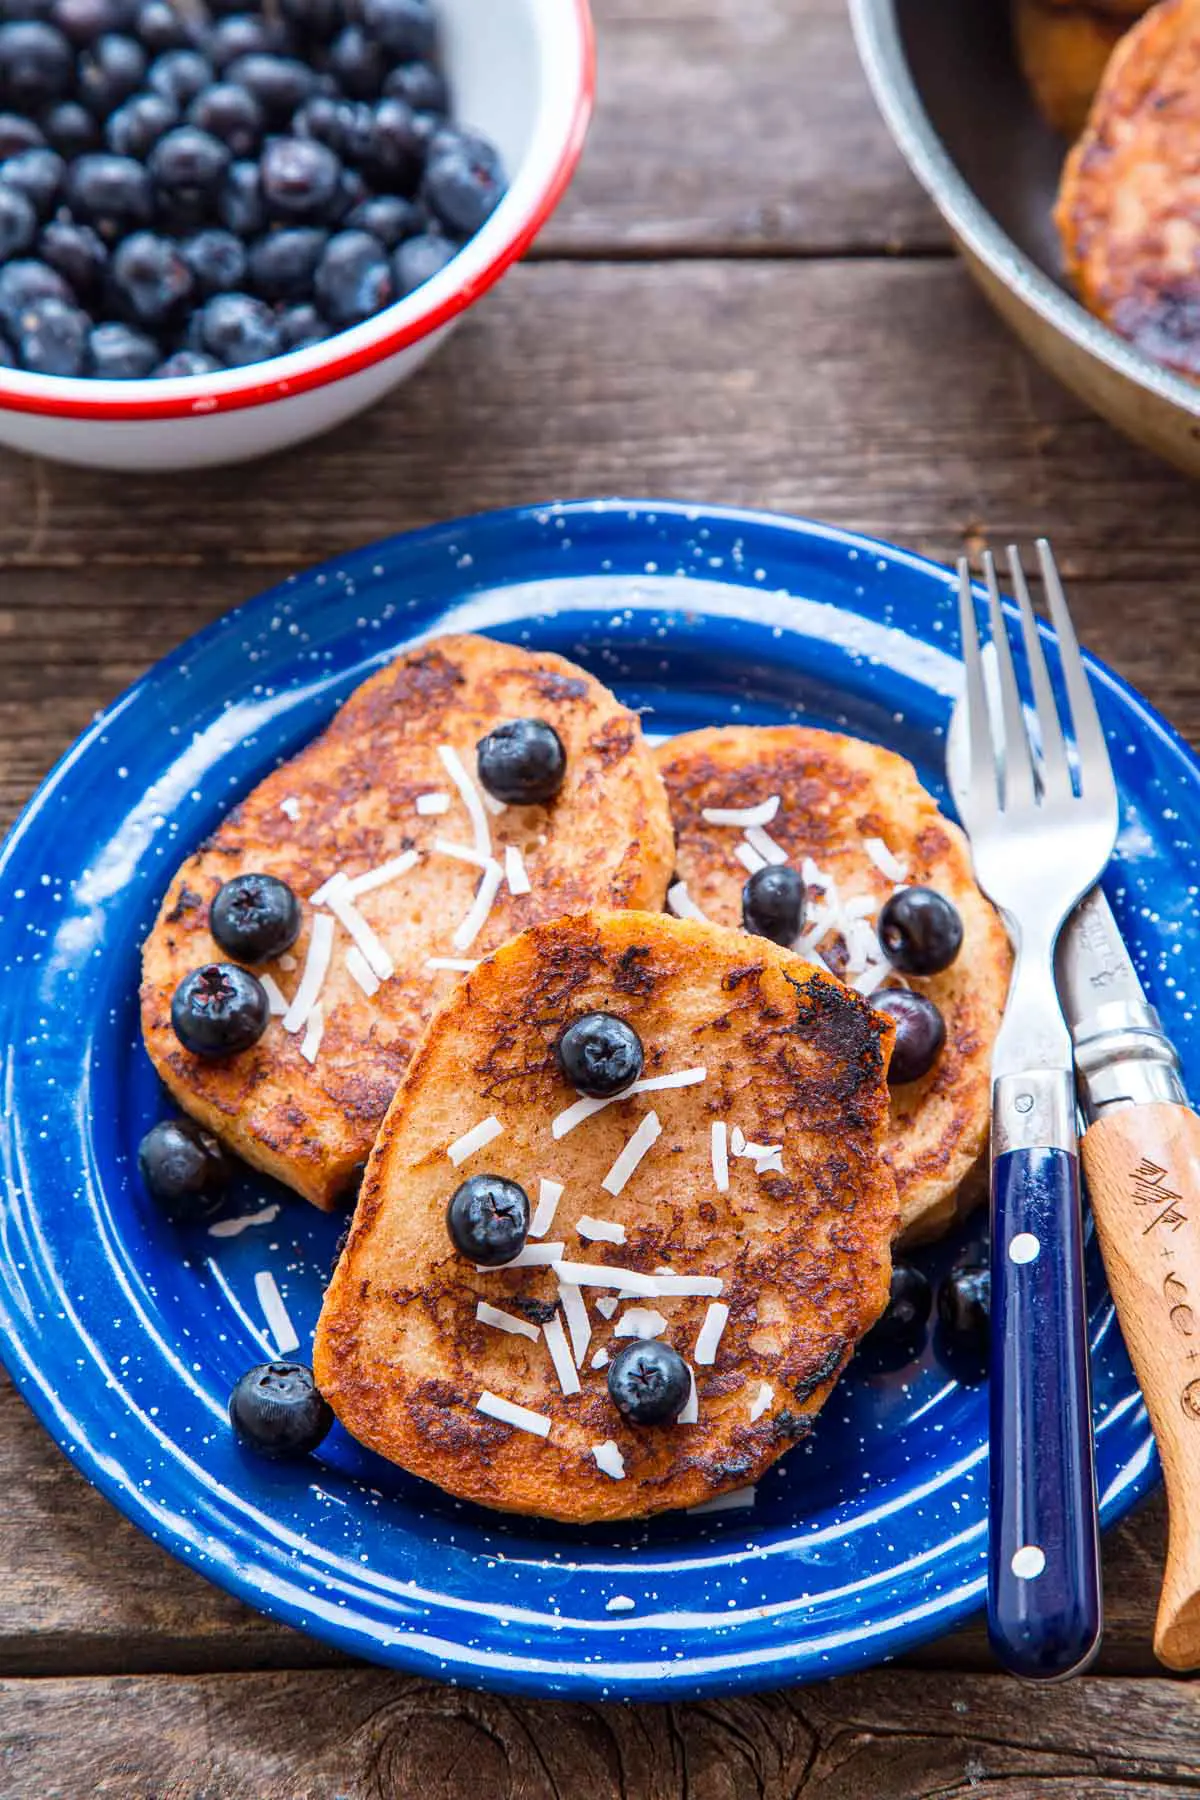 Three slices of French toast with blueberries on a blue plate